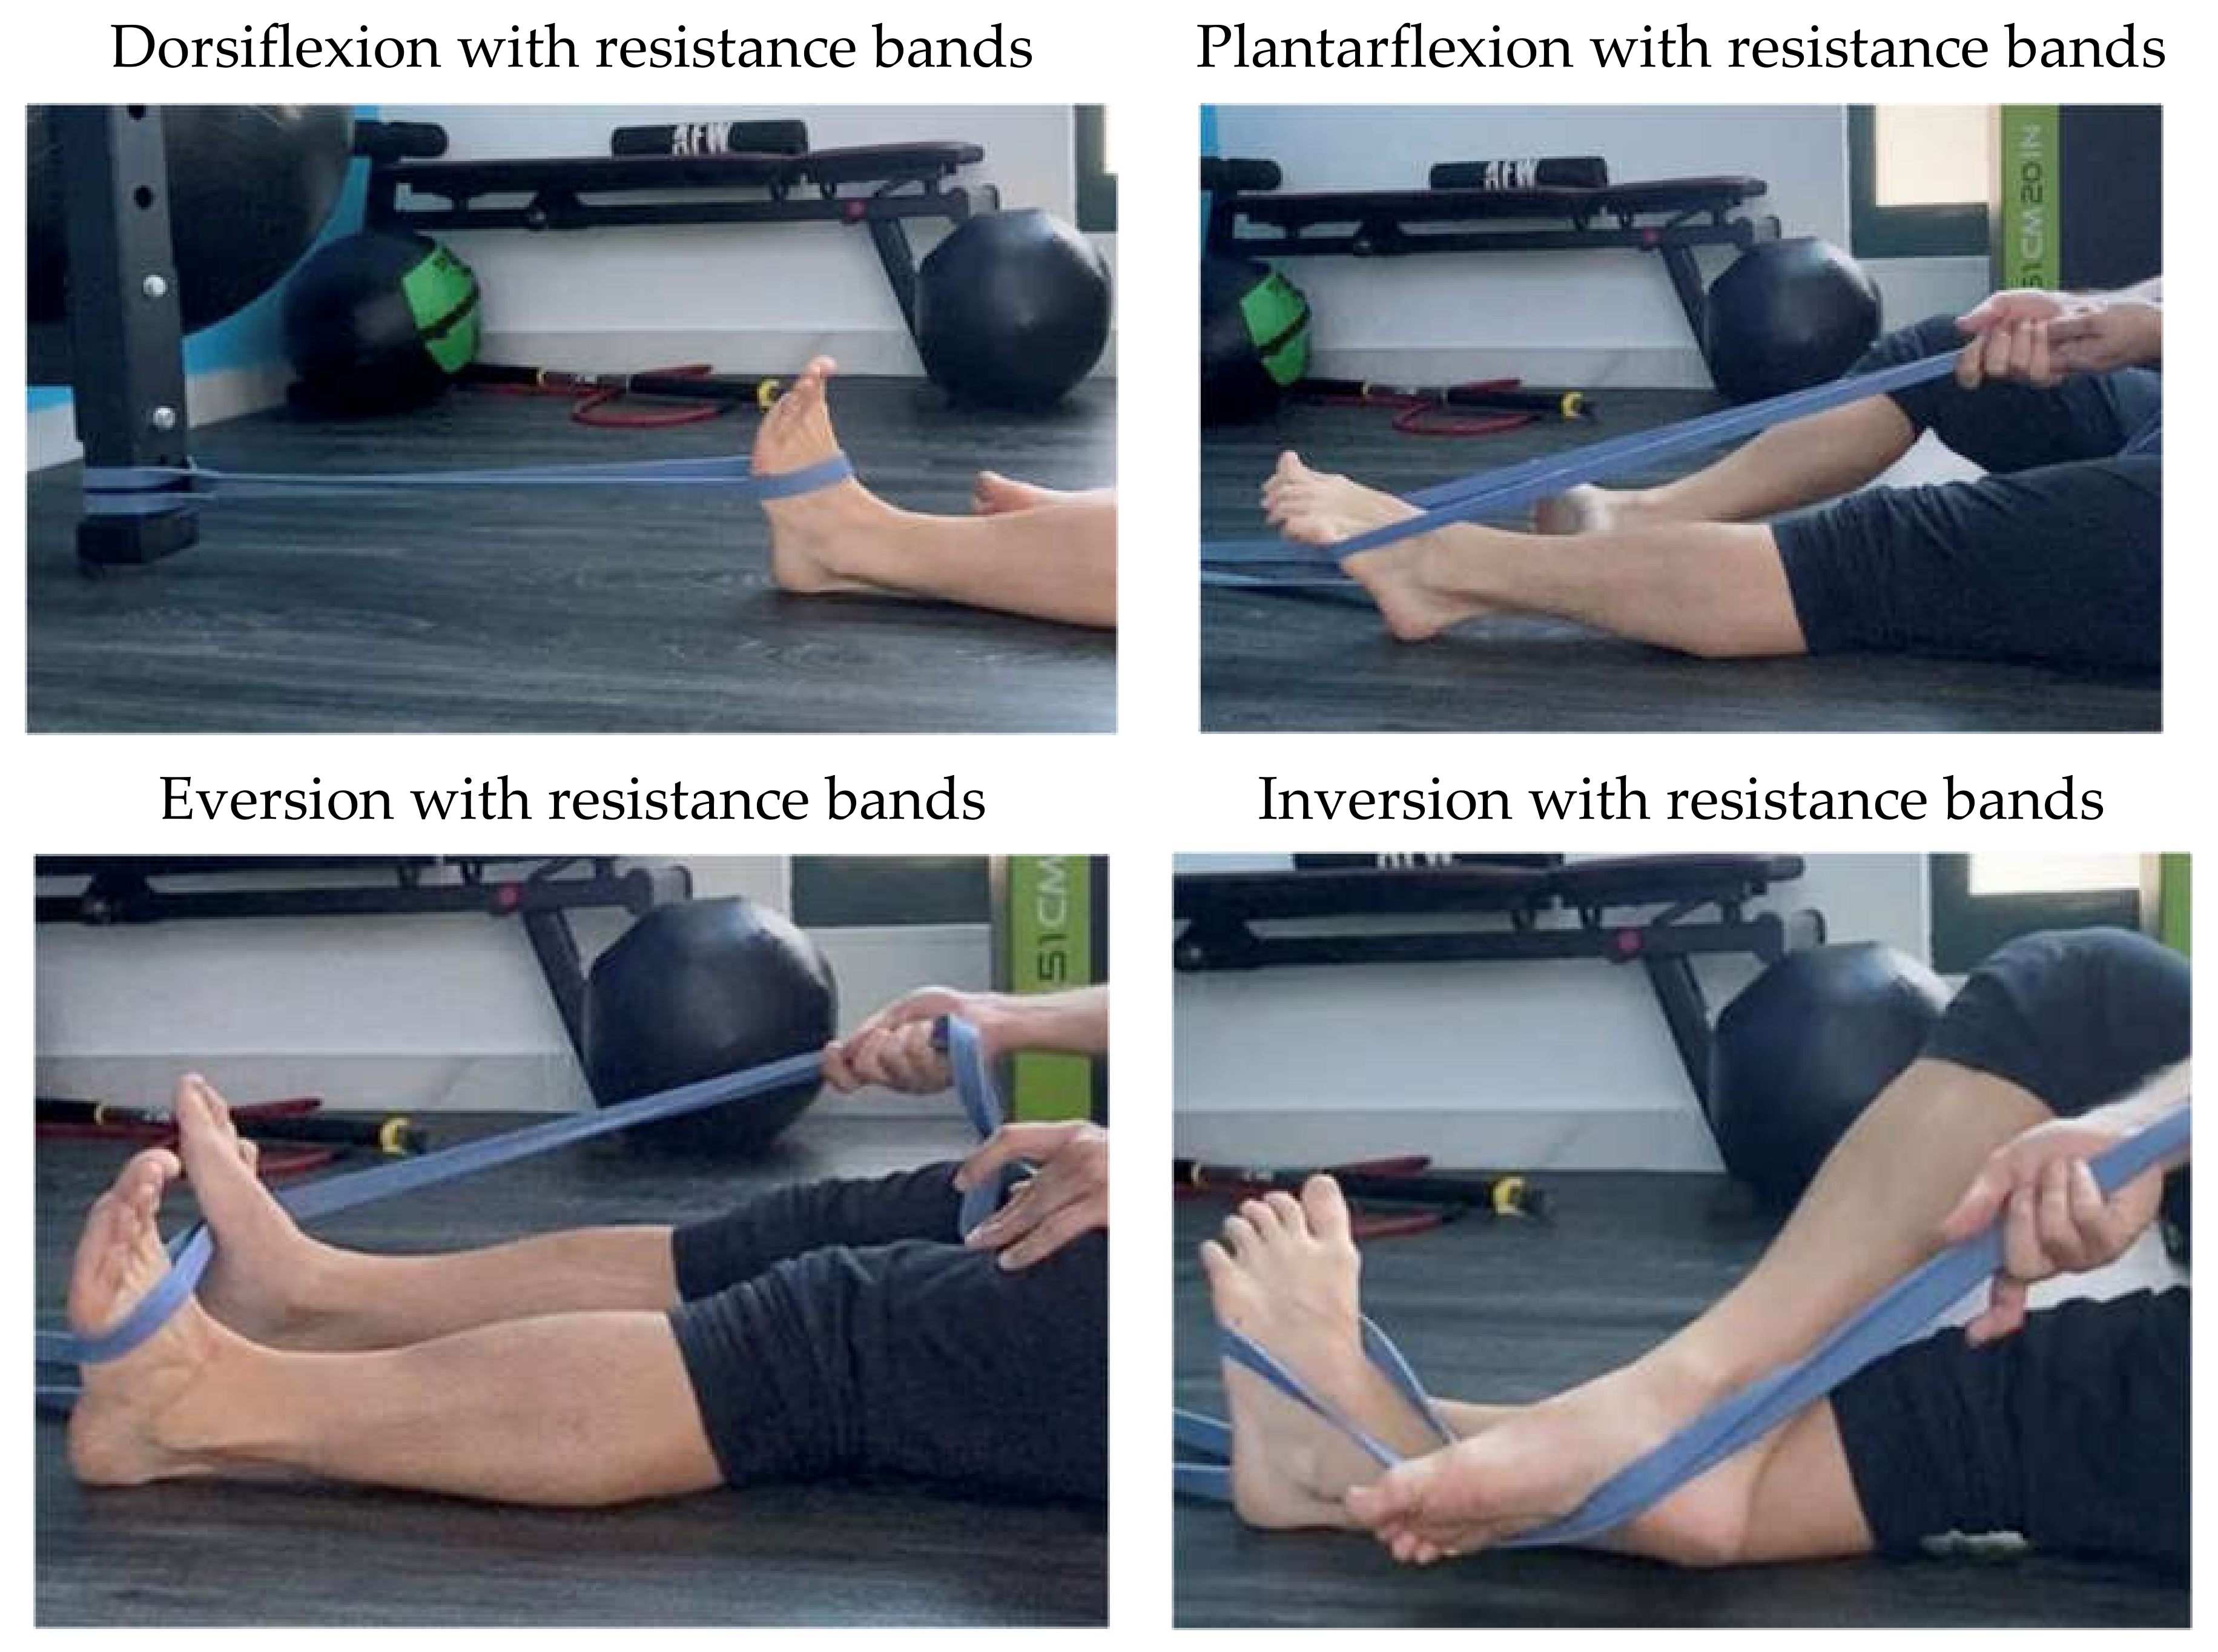 NeuroKinetic Therapy - Inversion and eversion of the ankle, or